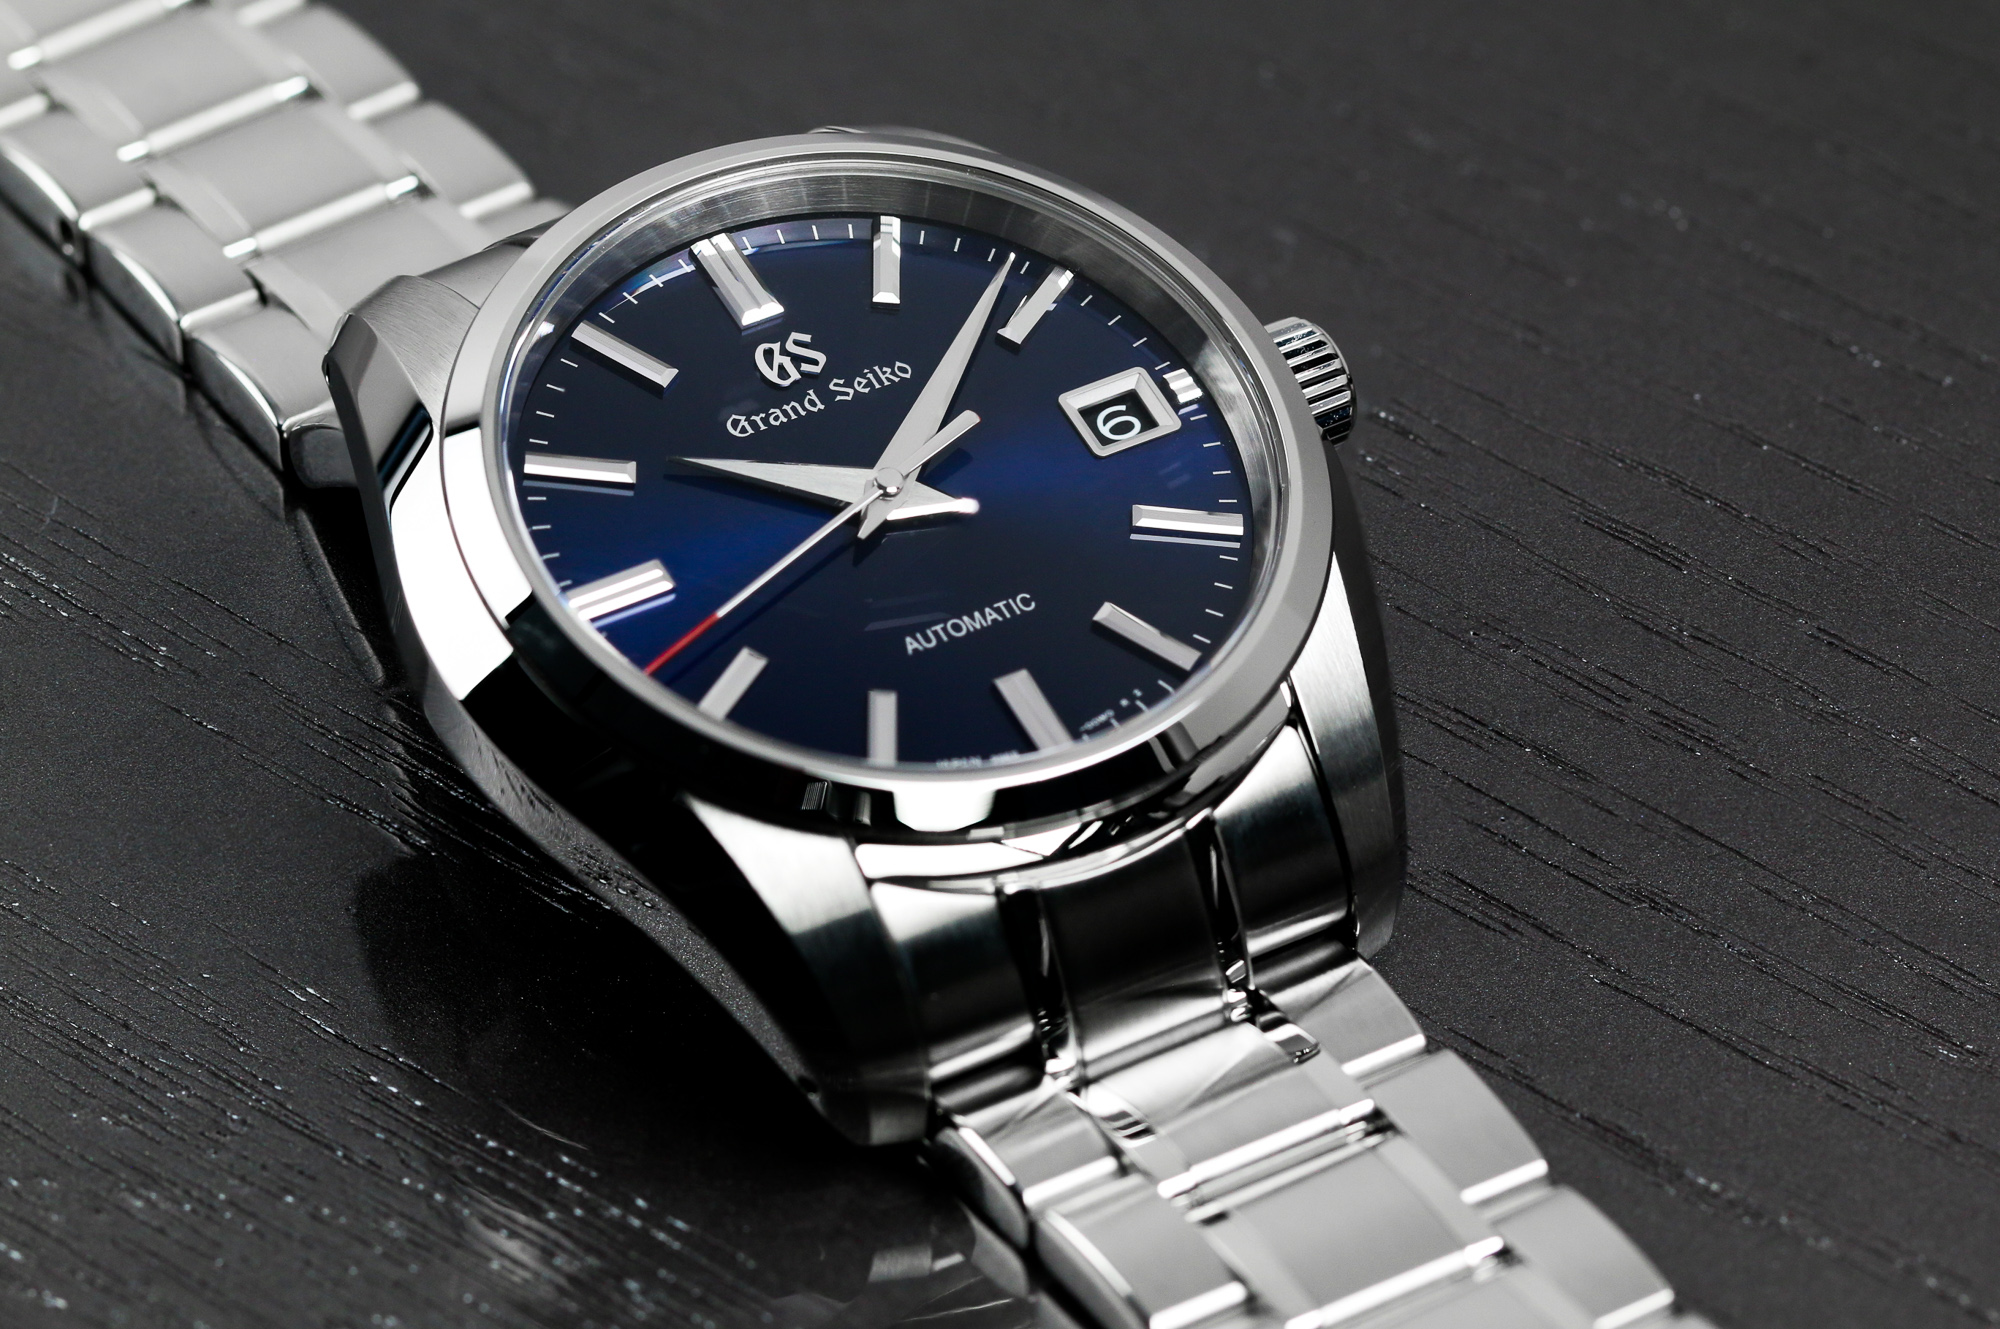 Grand Seiko SBGR321 wristwatch with a blue dial and red accents on a tabletop.